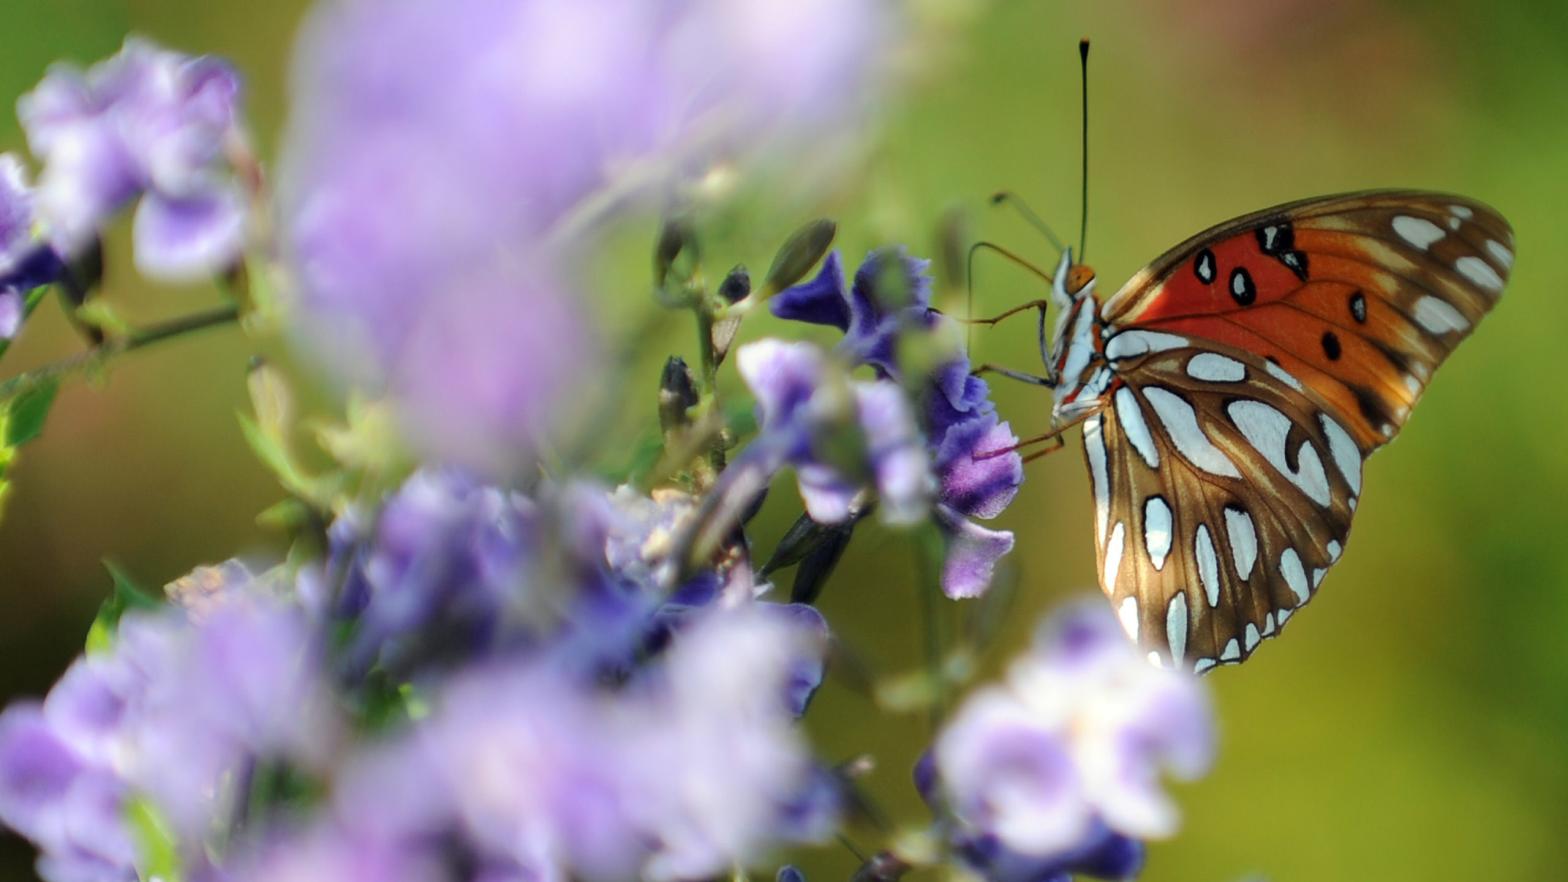 A butterfly sits atop a flower in Los Angeles, California, July 9, 2008. (Photo: Gabriel Bouys, Getty Images)